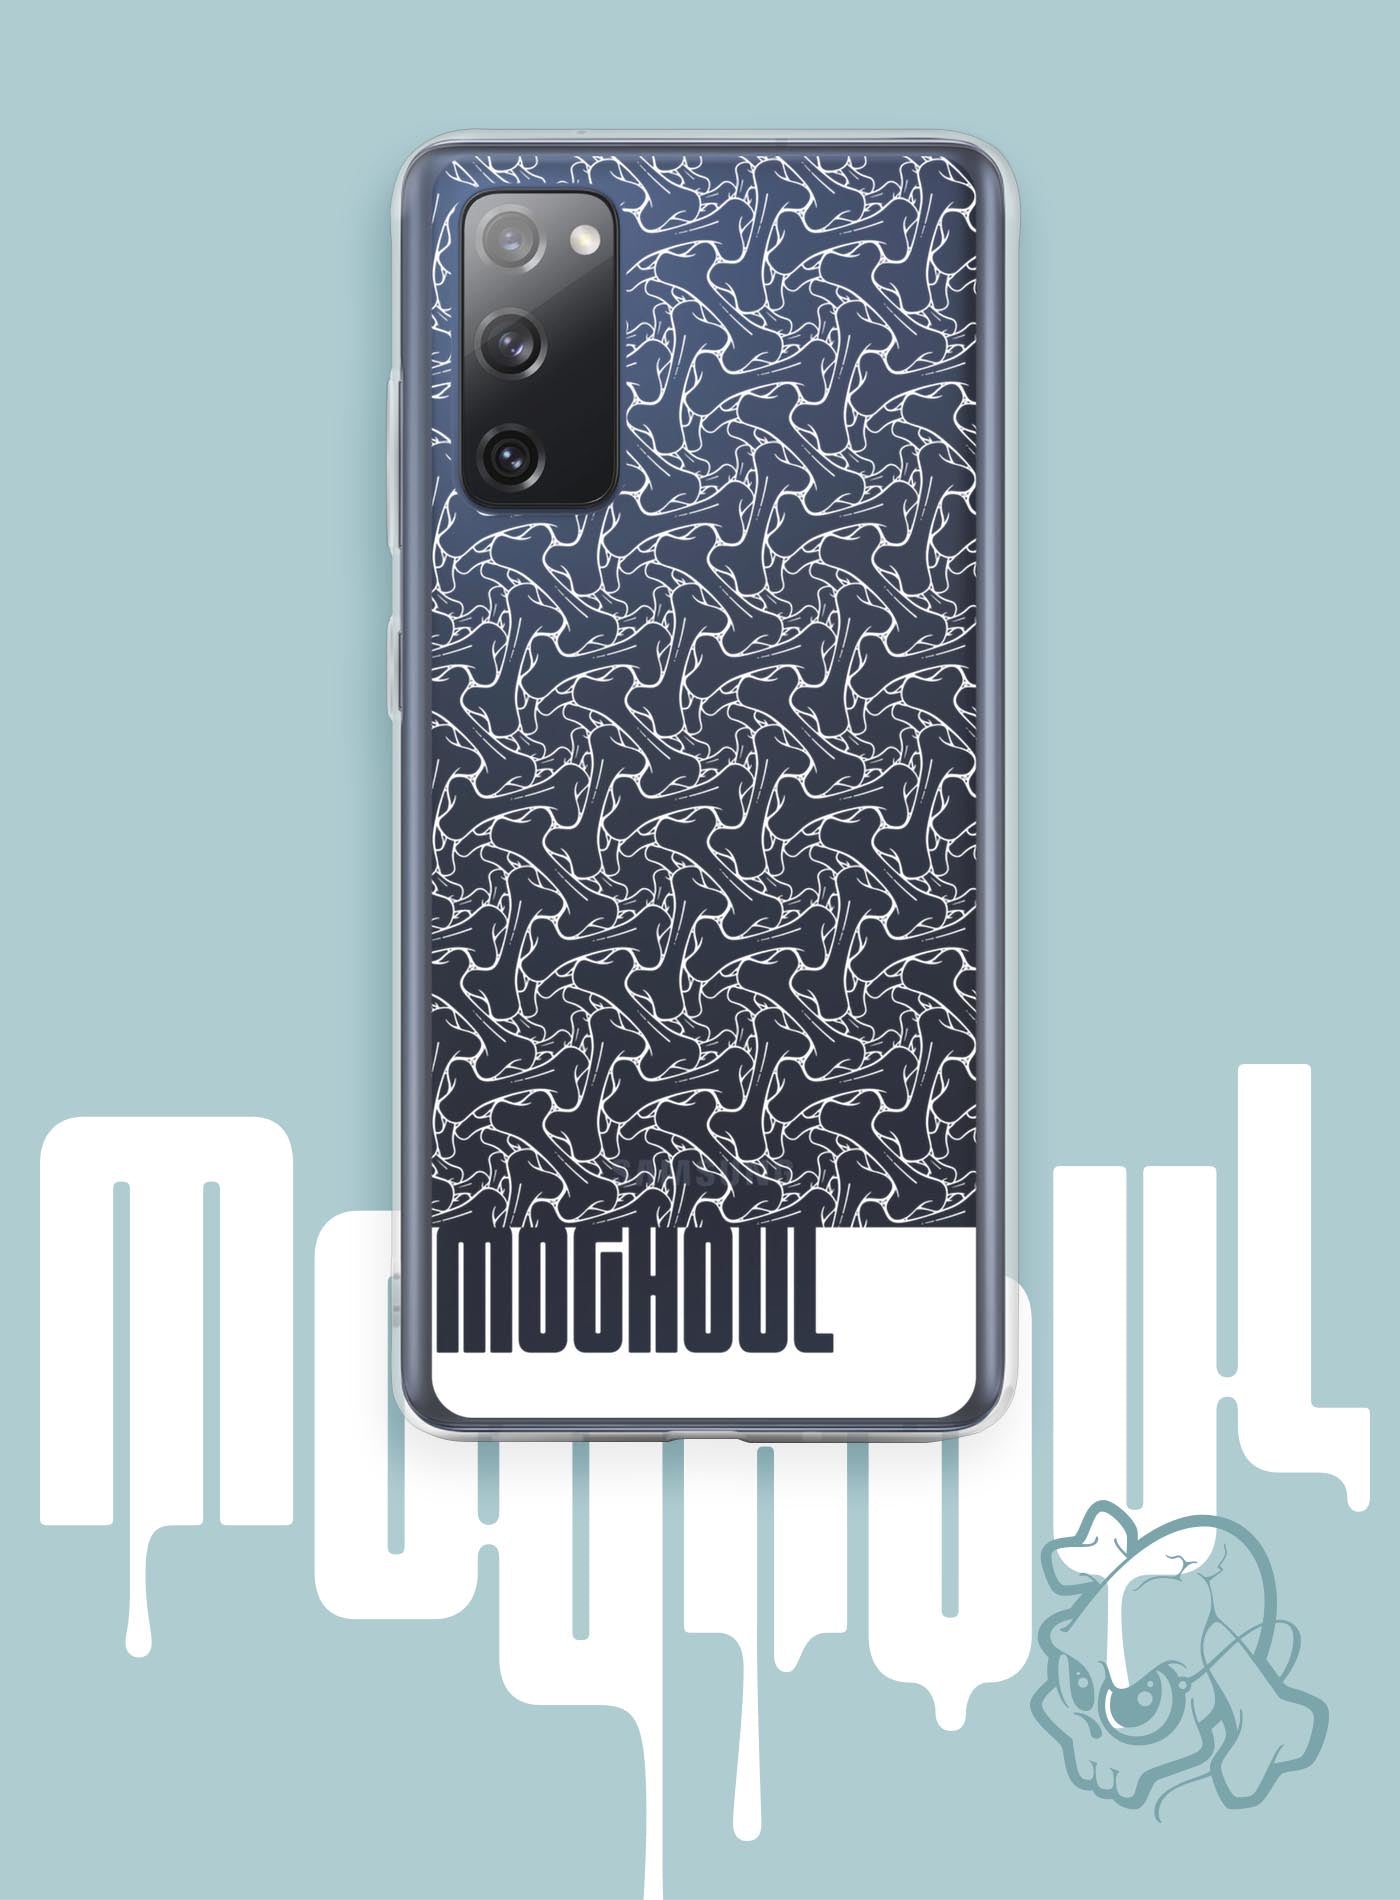 Samsung case featuring a patter of bones based on Islamic ornamental art in white color.